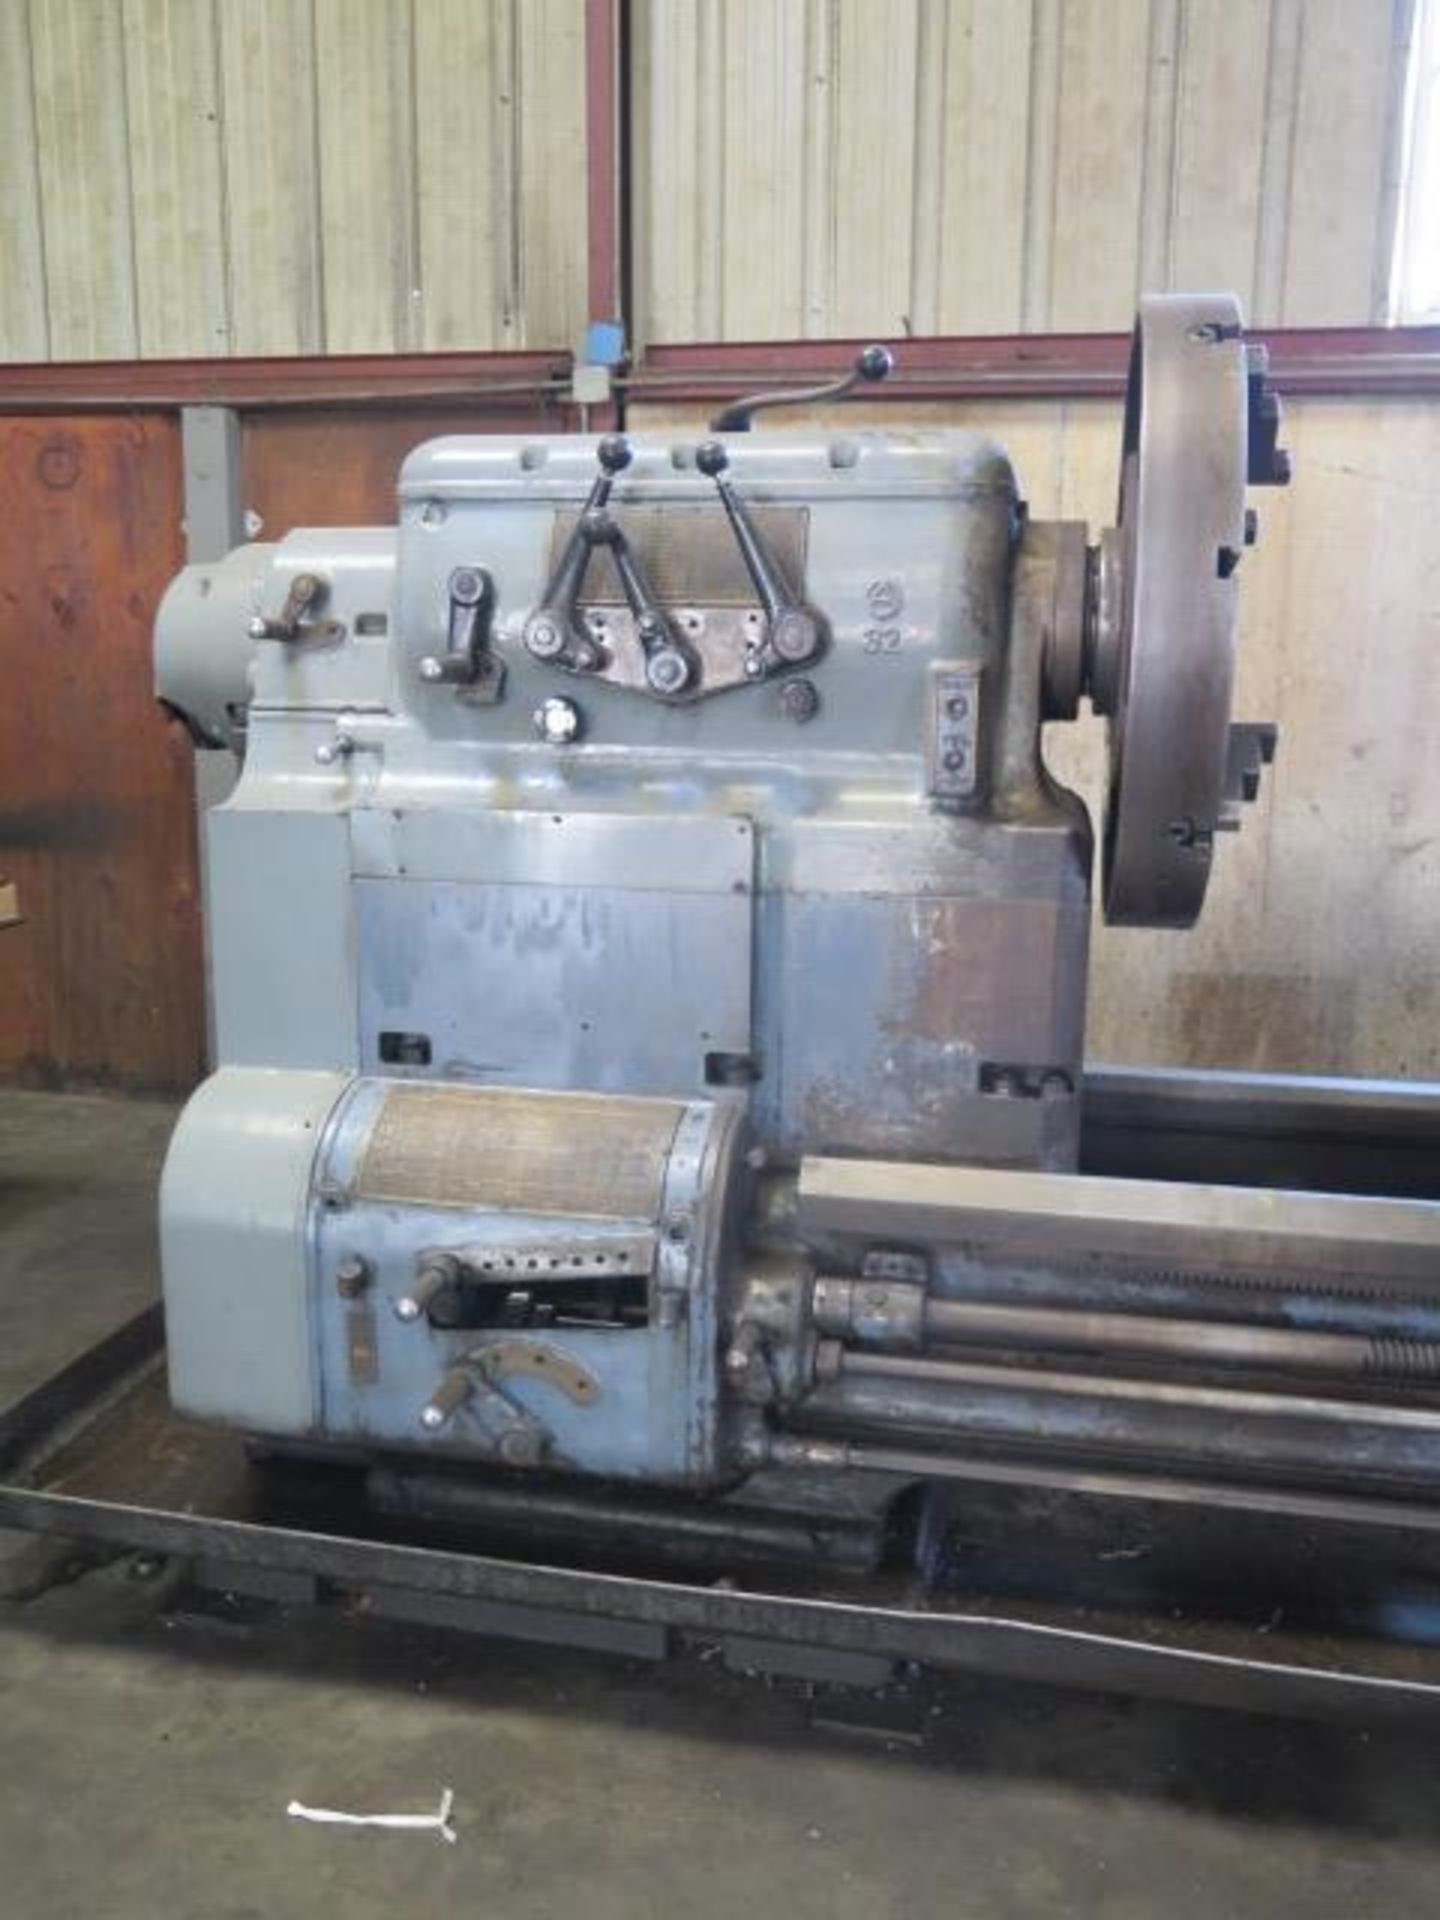 Axelson 32 48” x 168” Geared Head Lathe s/n 1644 w/ 16” Extension, 6-555 RPM, Inch Thrd, SOLD AS IS - Image 3 of 21